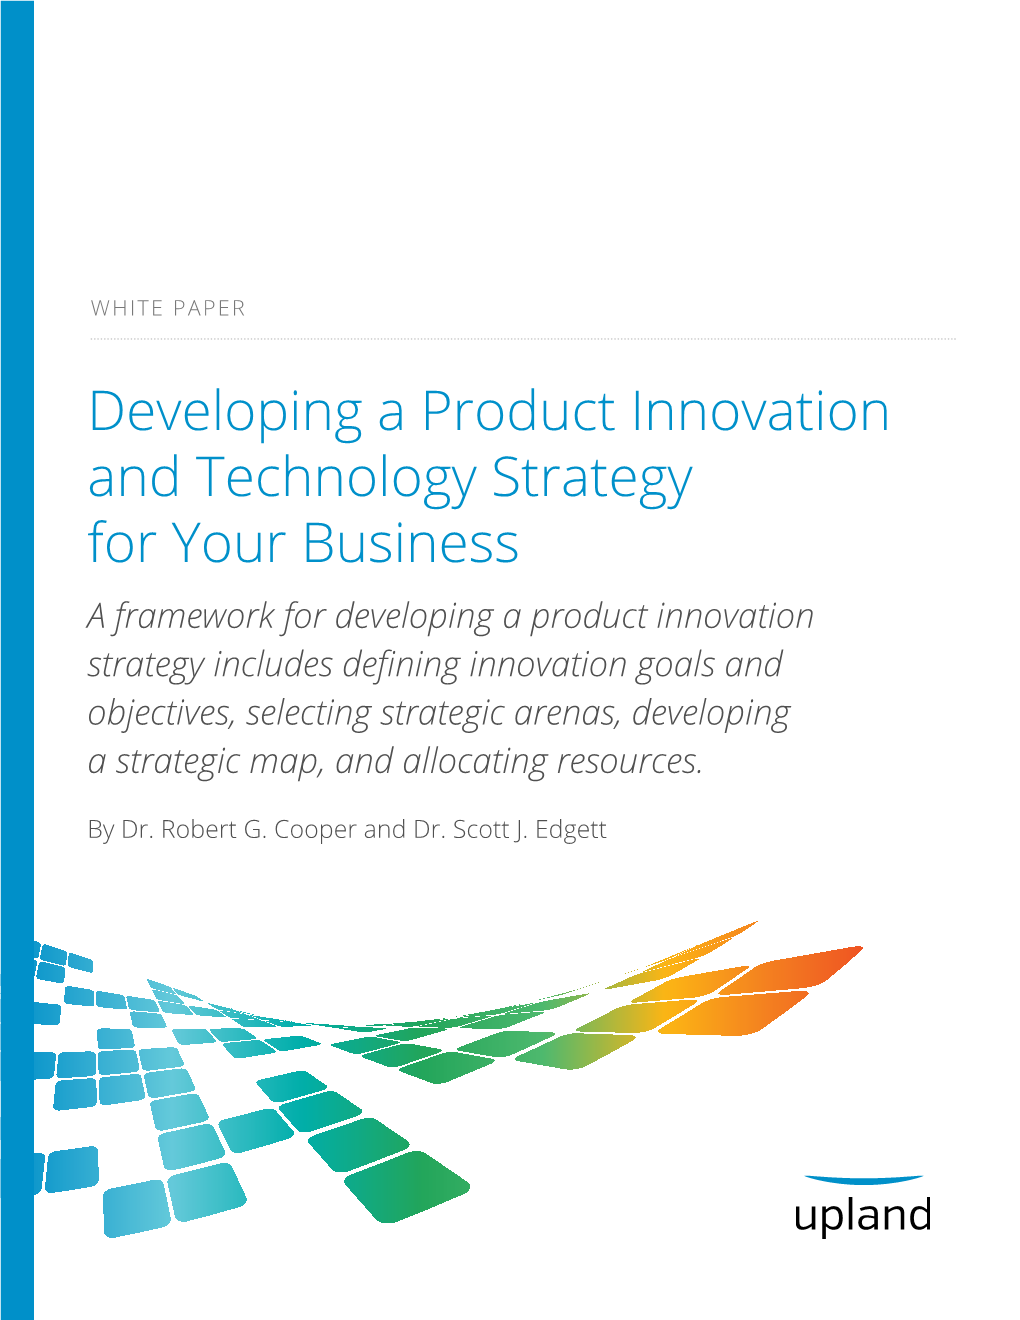 Developing a Product Innovation and Technology Strategy for Your